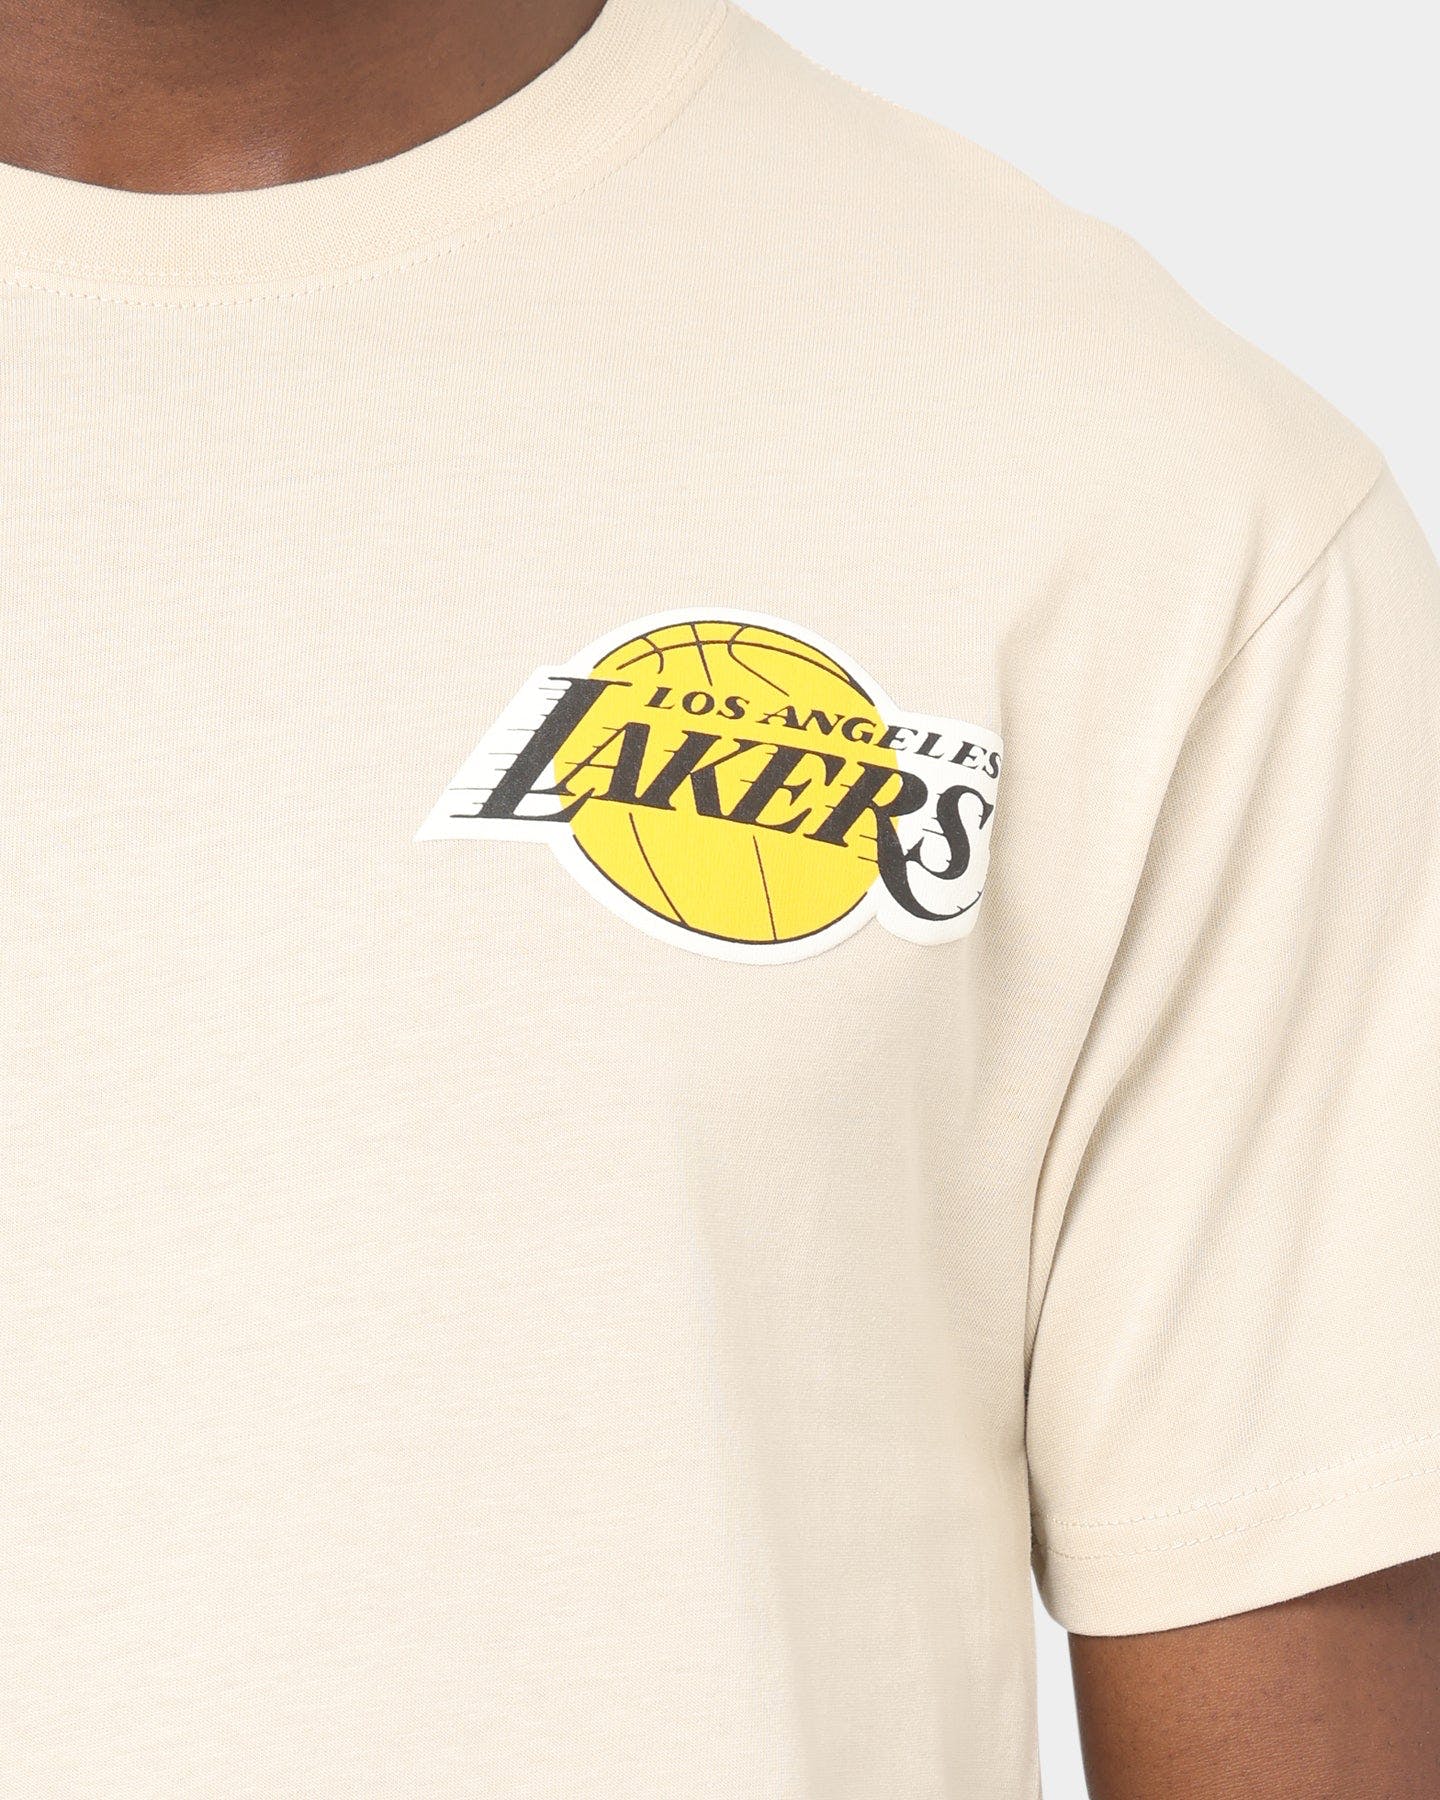 MITCHELL & NESS - Los Angeles Lakers Short Sleeve T-Shirt - CLAY